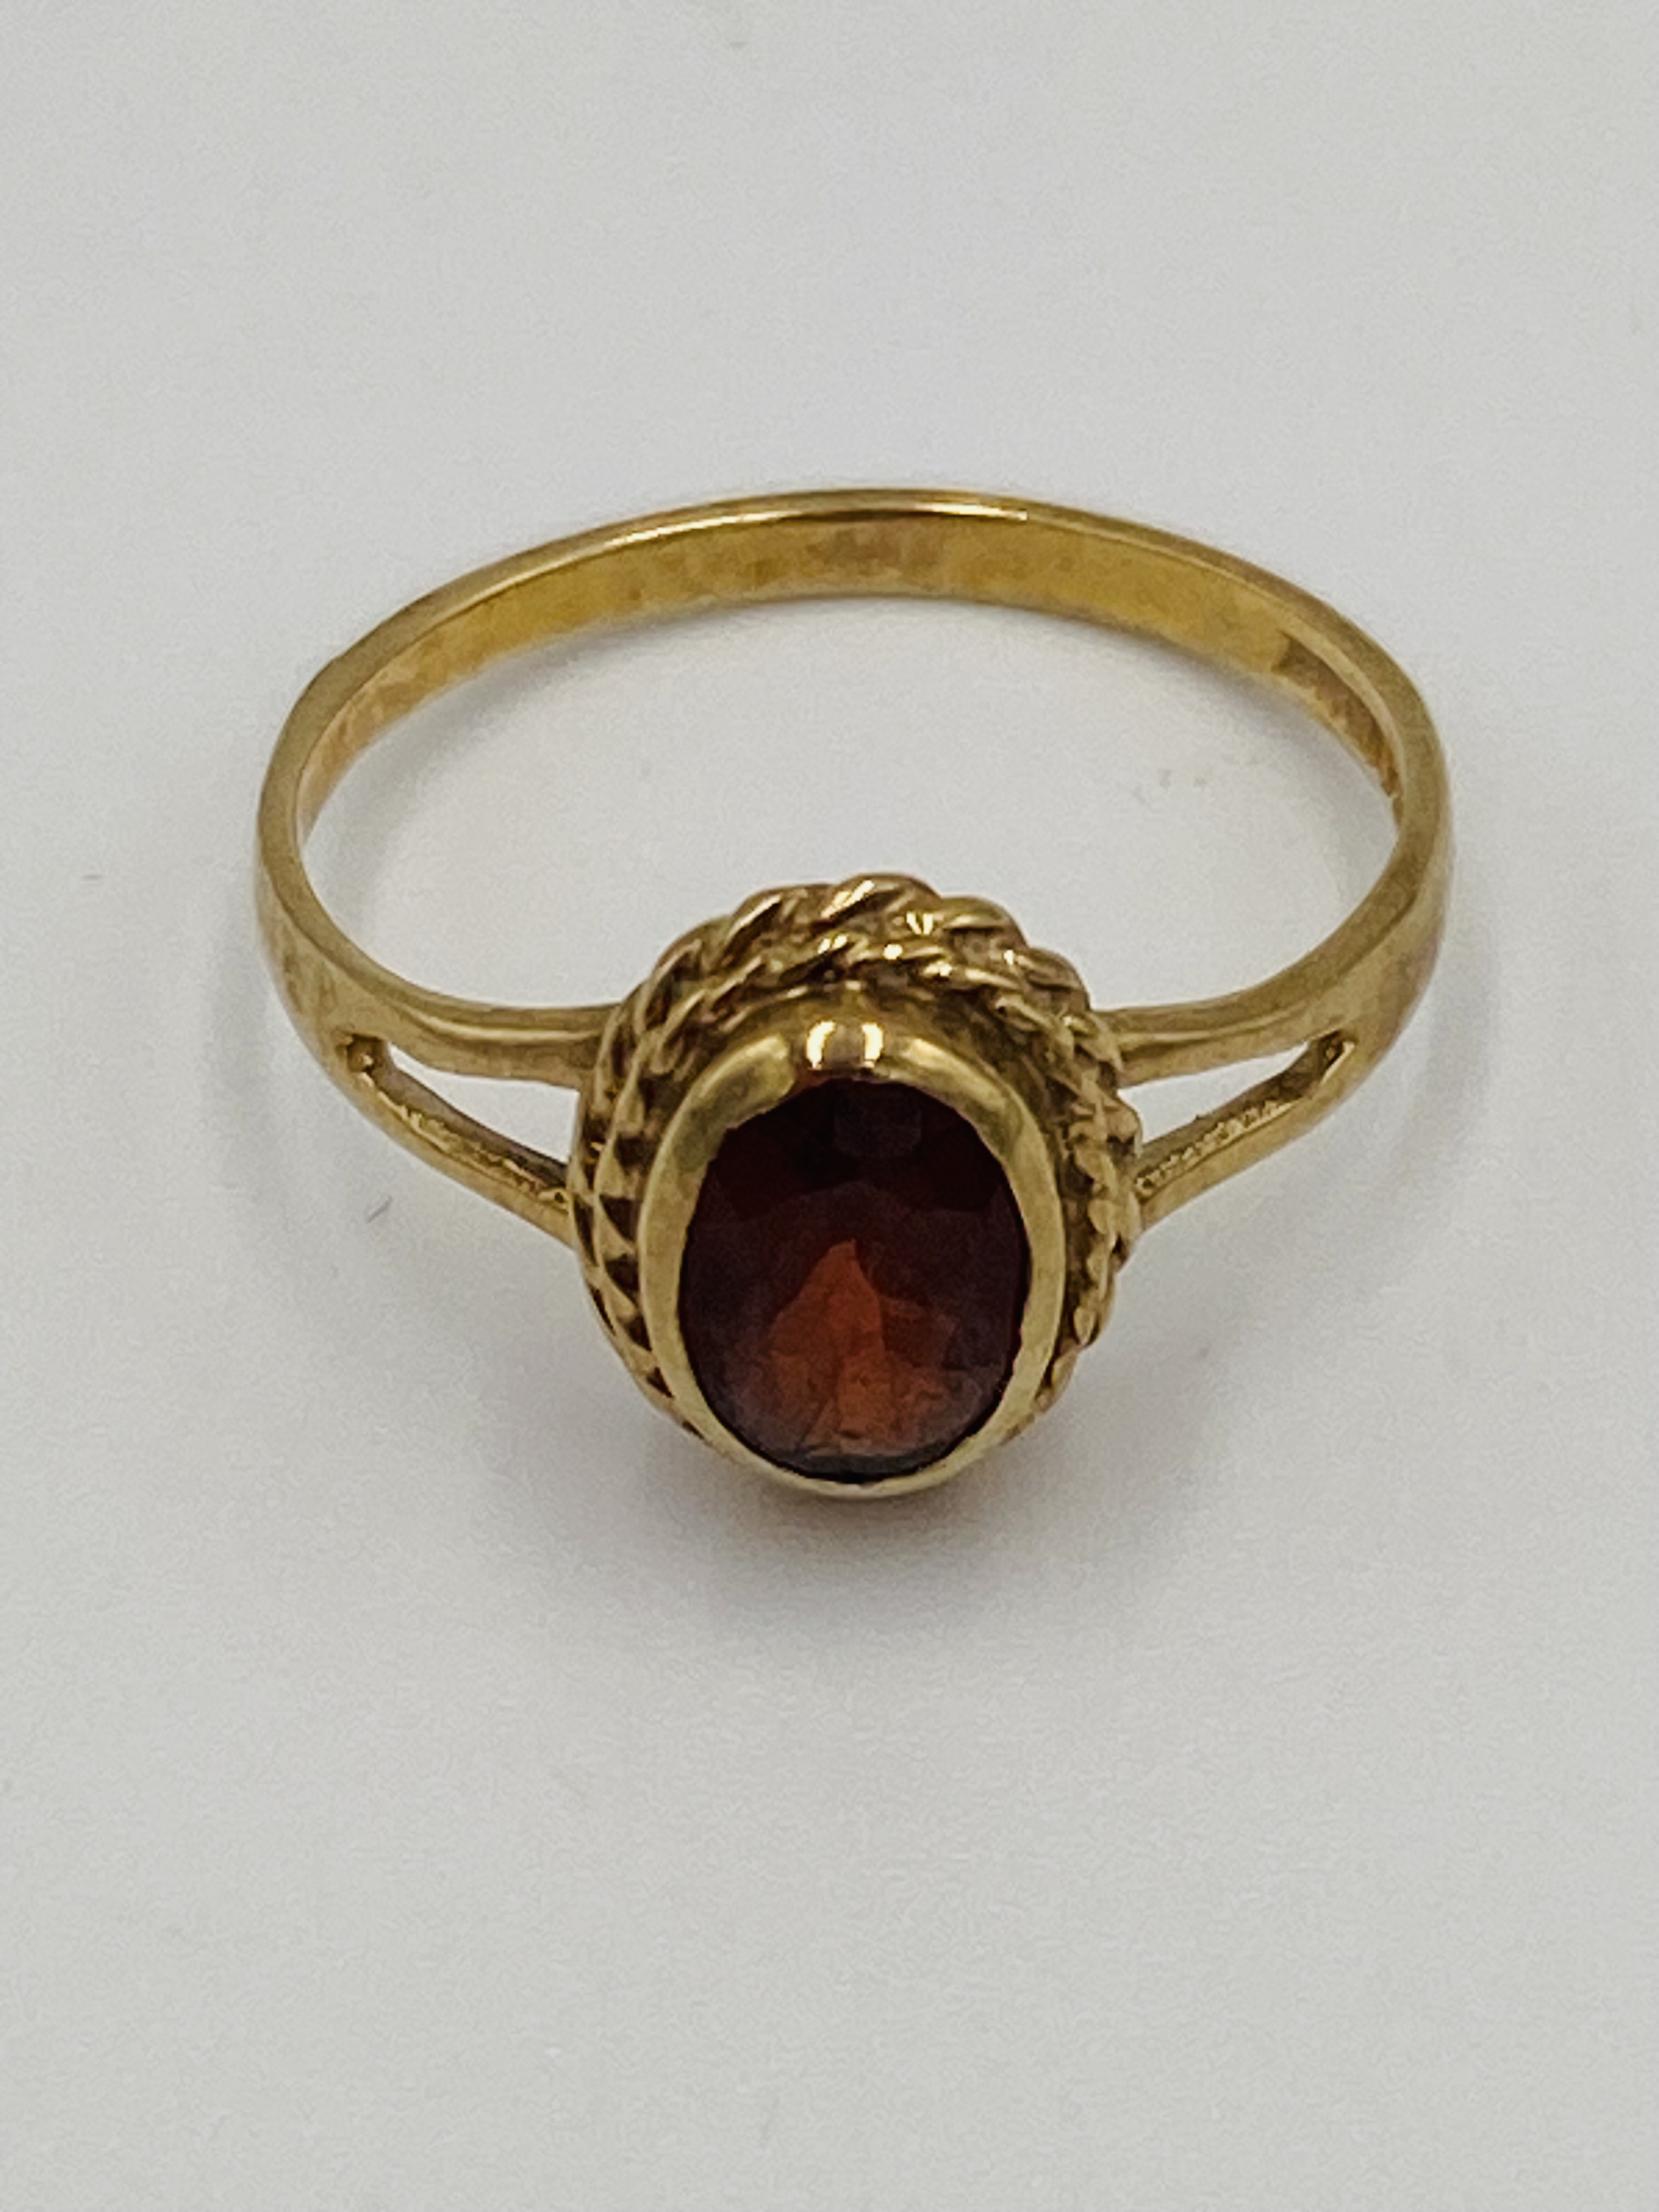 9ct gold ring set with a red stone